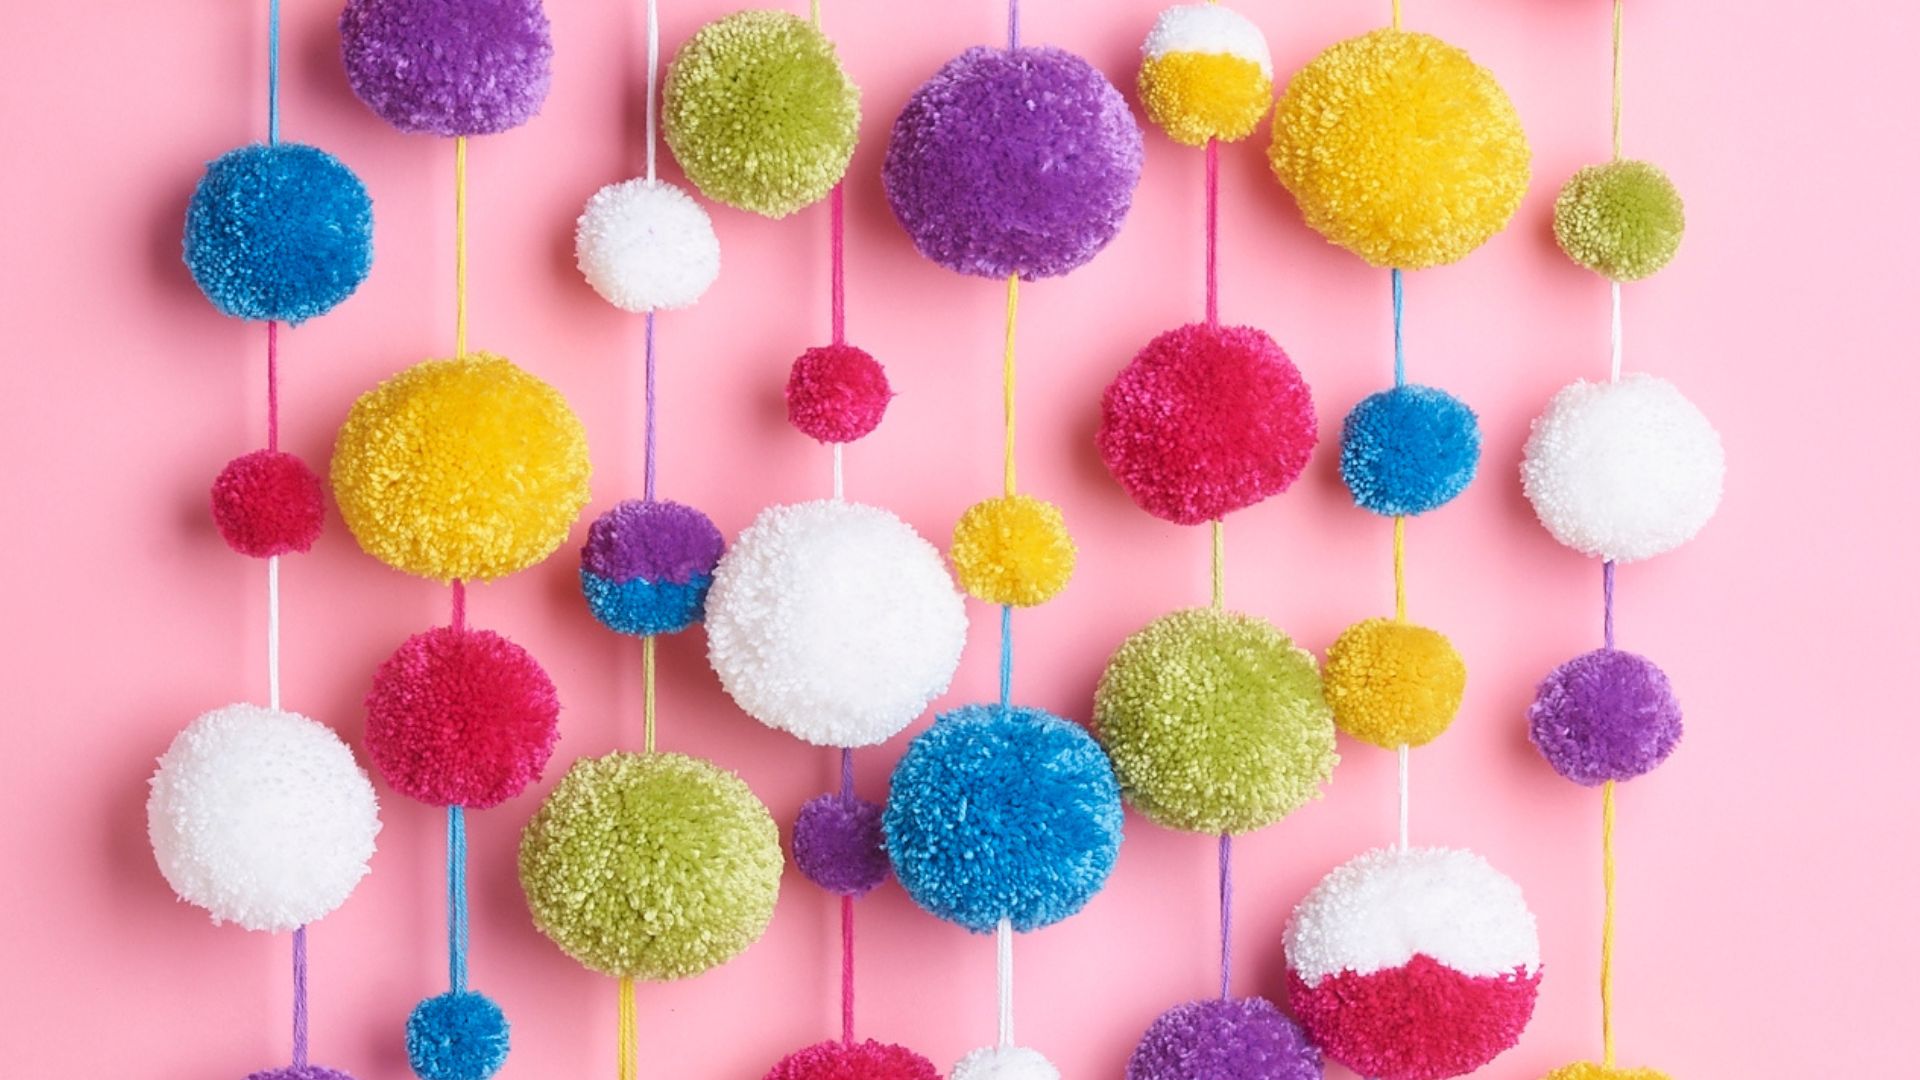 How to make a pom pom in 4 different ways